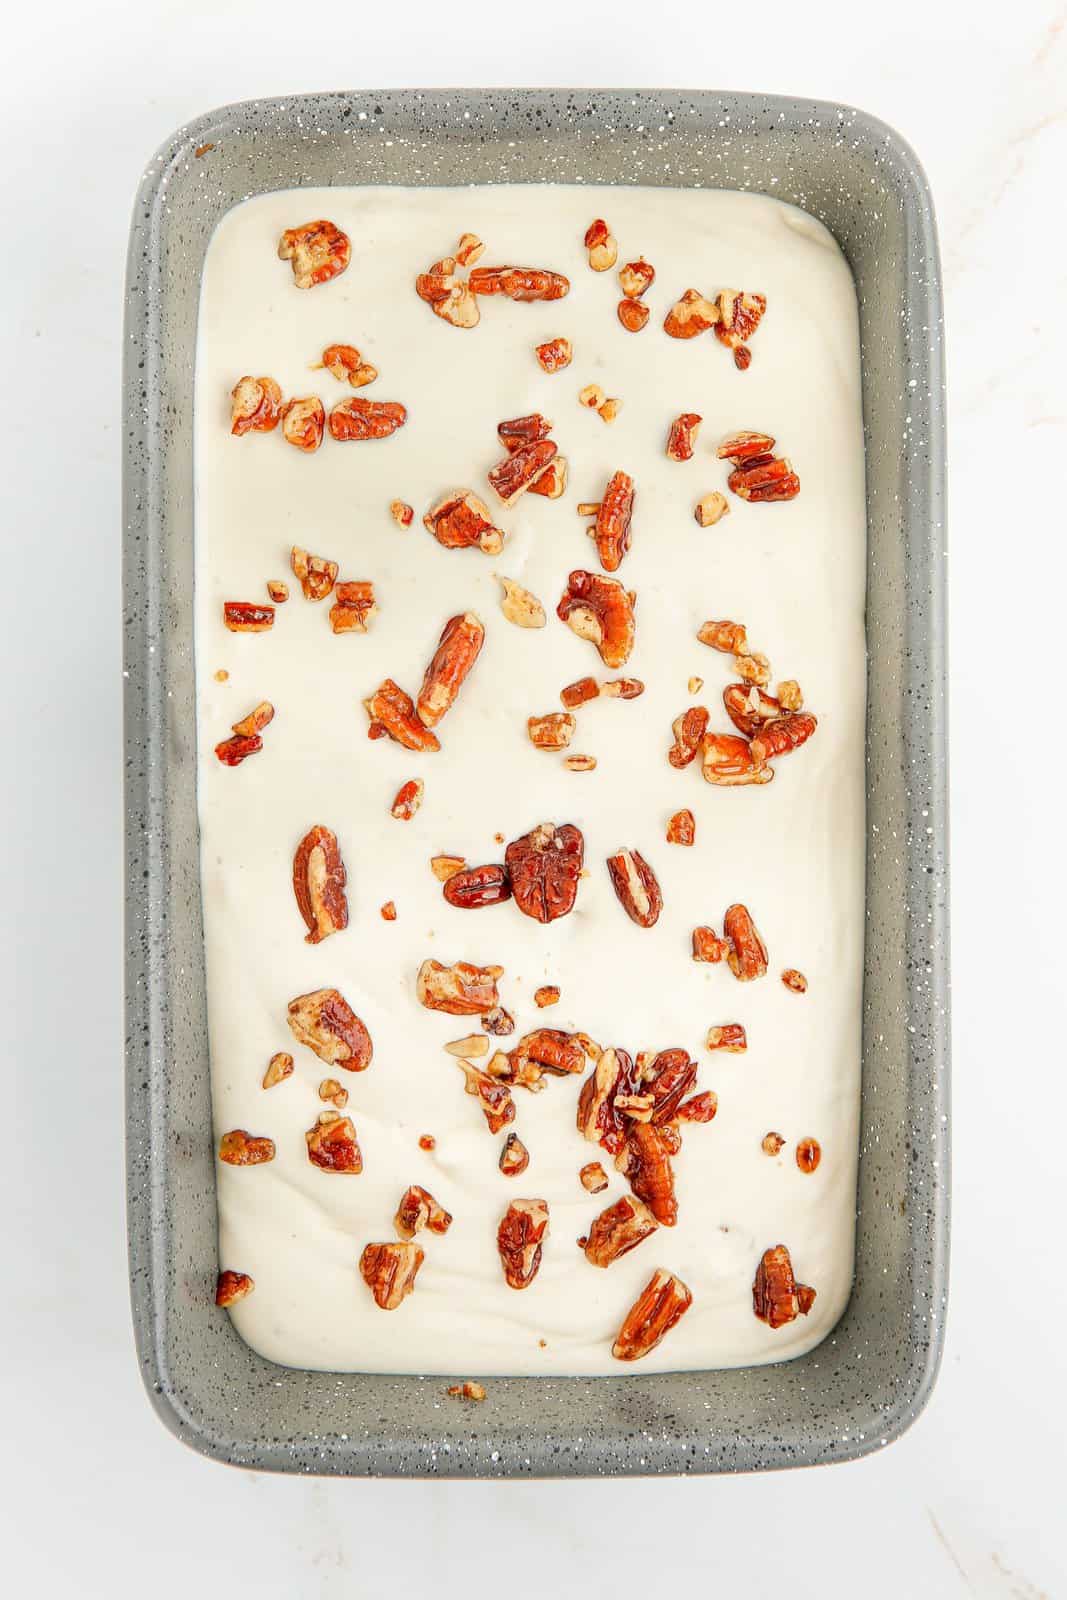 Ice cream mixture added to loaf pan topped with pecans.